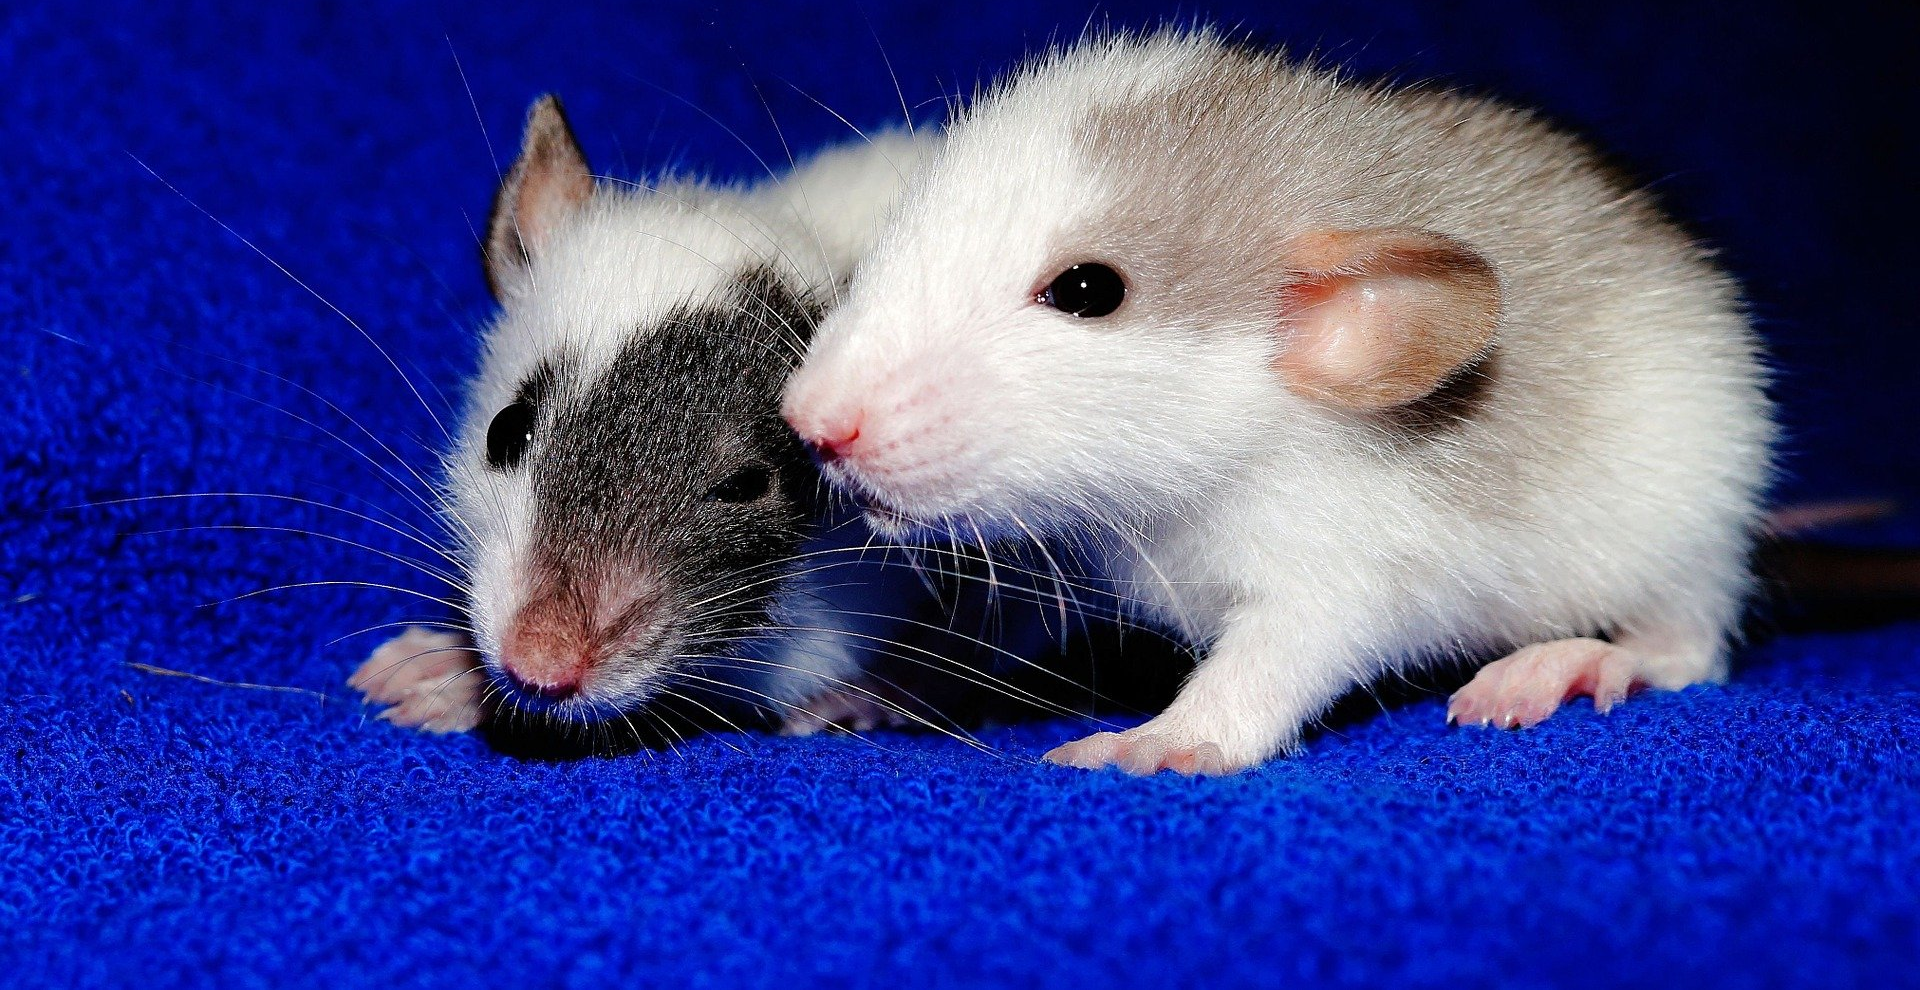 two baby rats on a blue fleece blanket